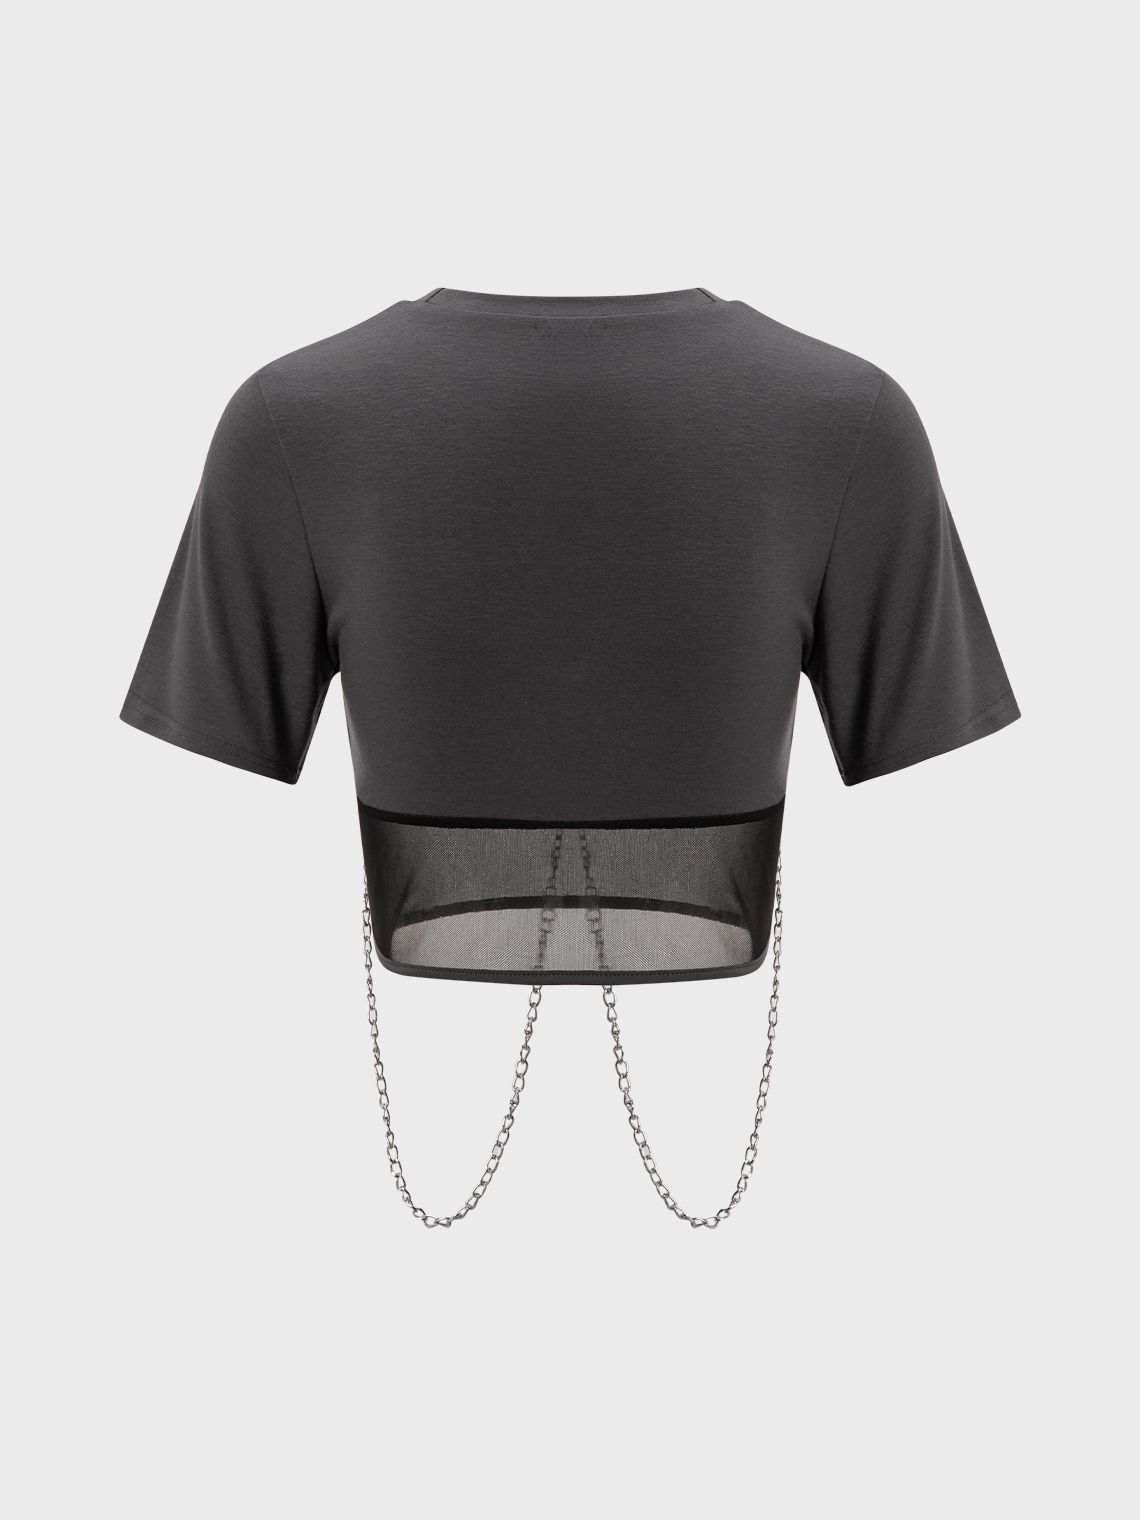 【Final Sale】Street Gray Graphic Patchwork Metal Chain Top T-Shirt